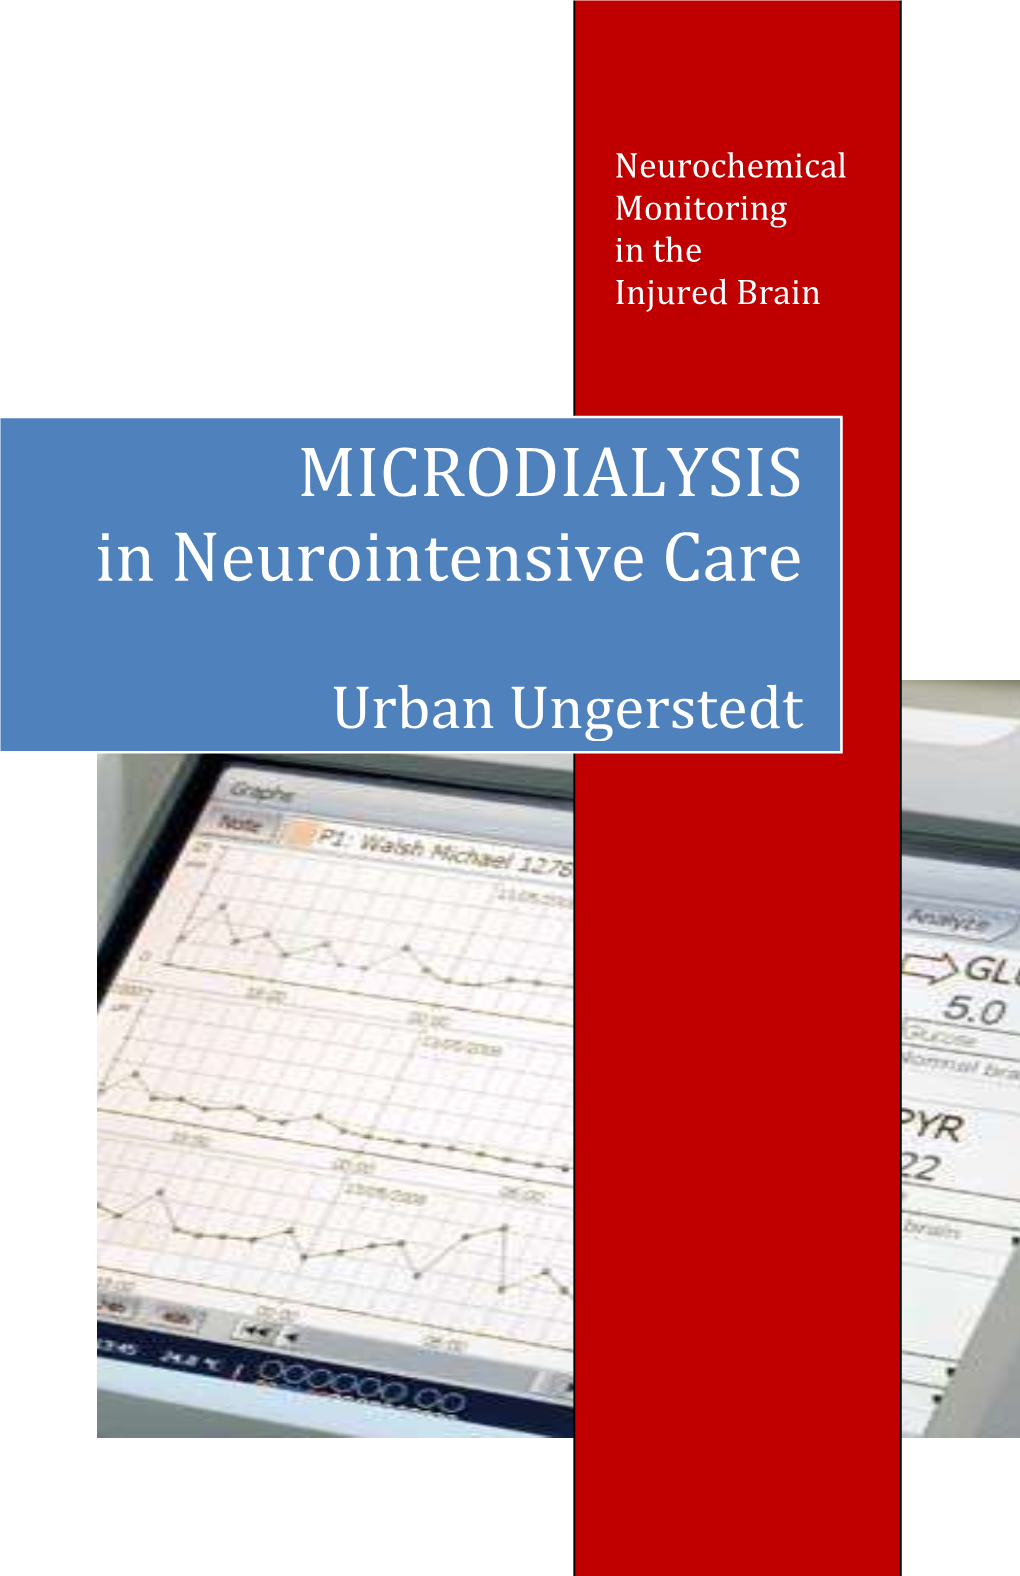 MICRODIALYSIS in Neurointensive Care